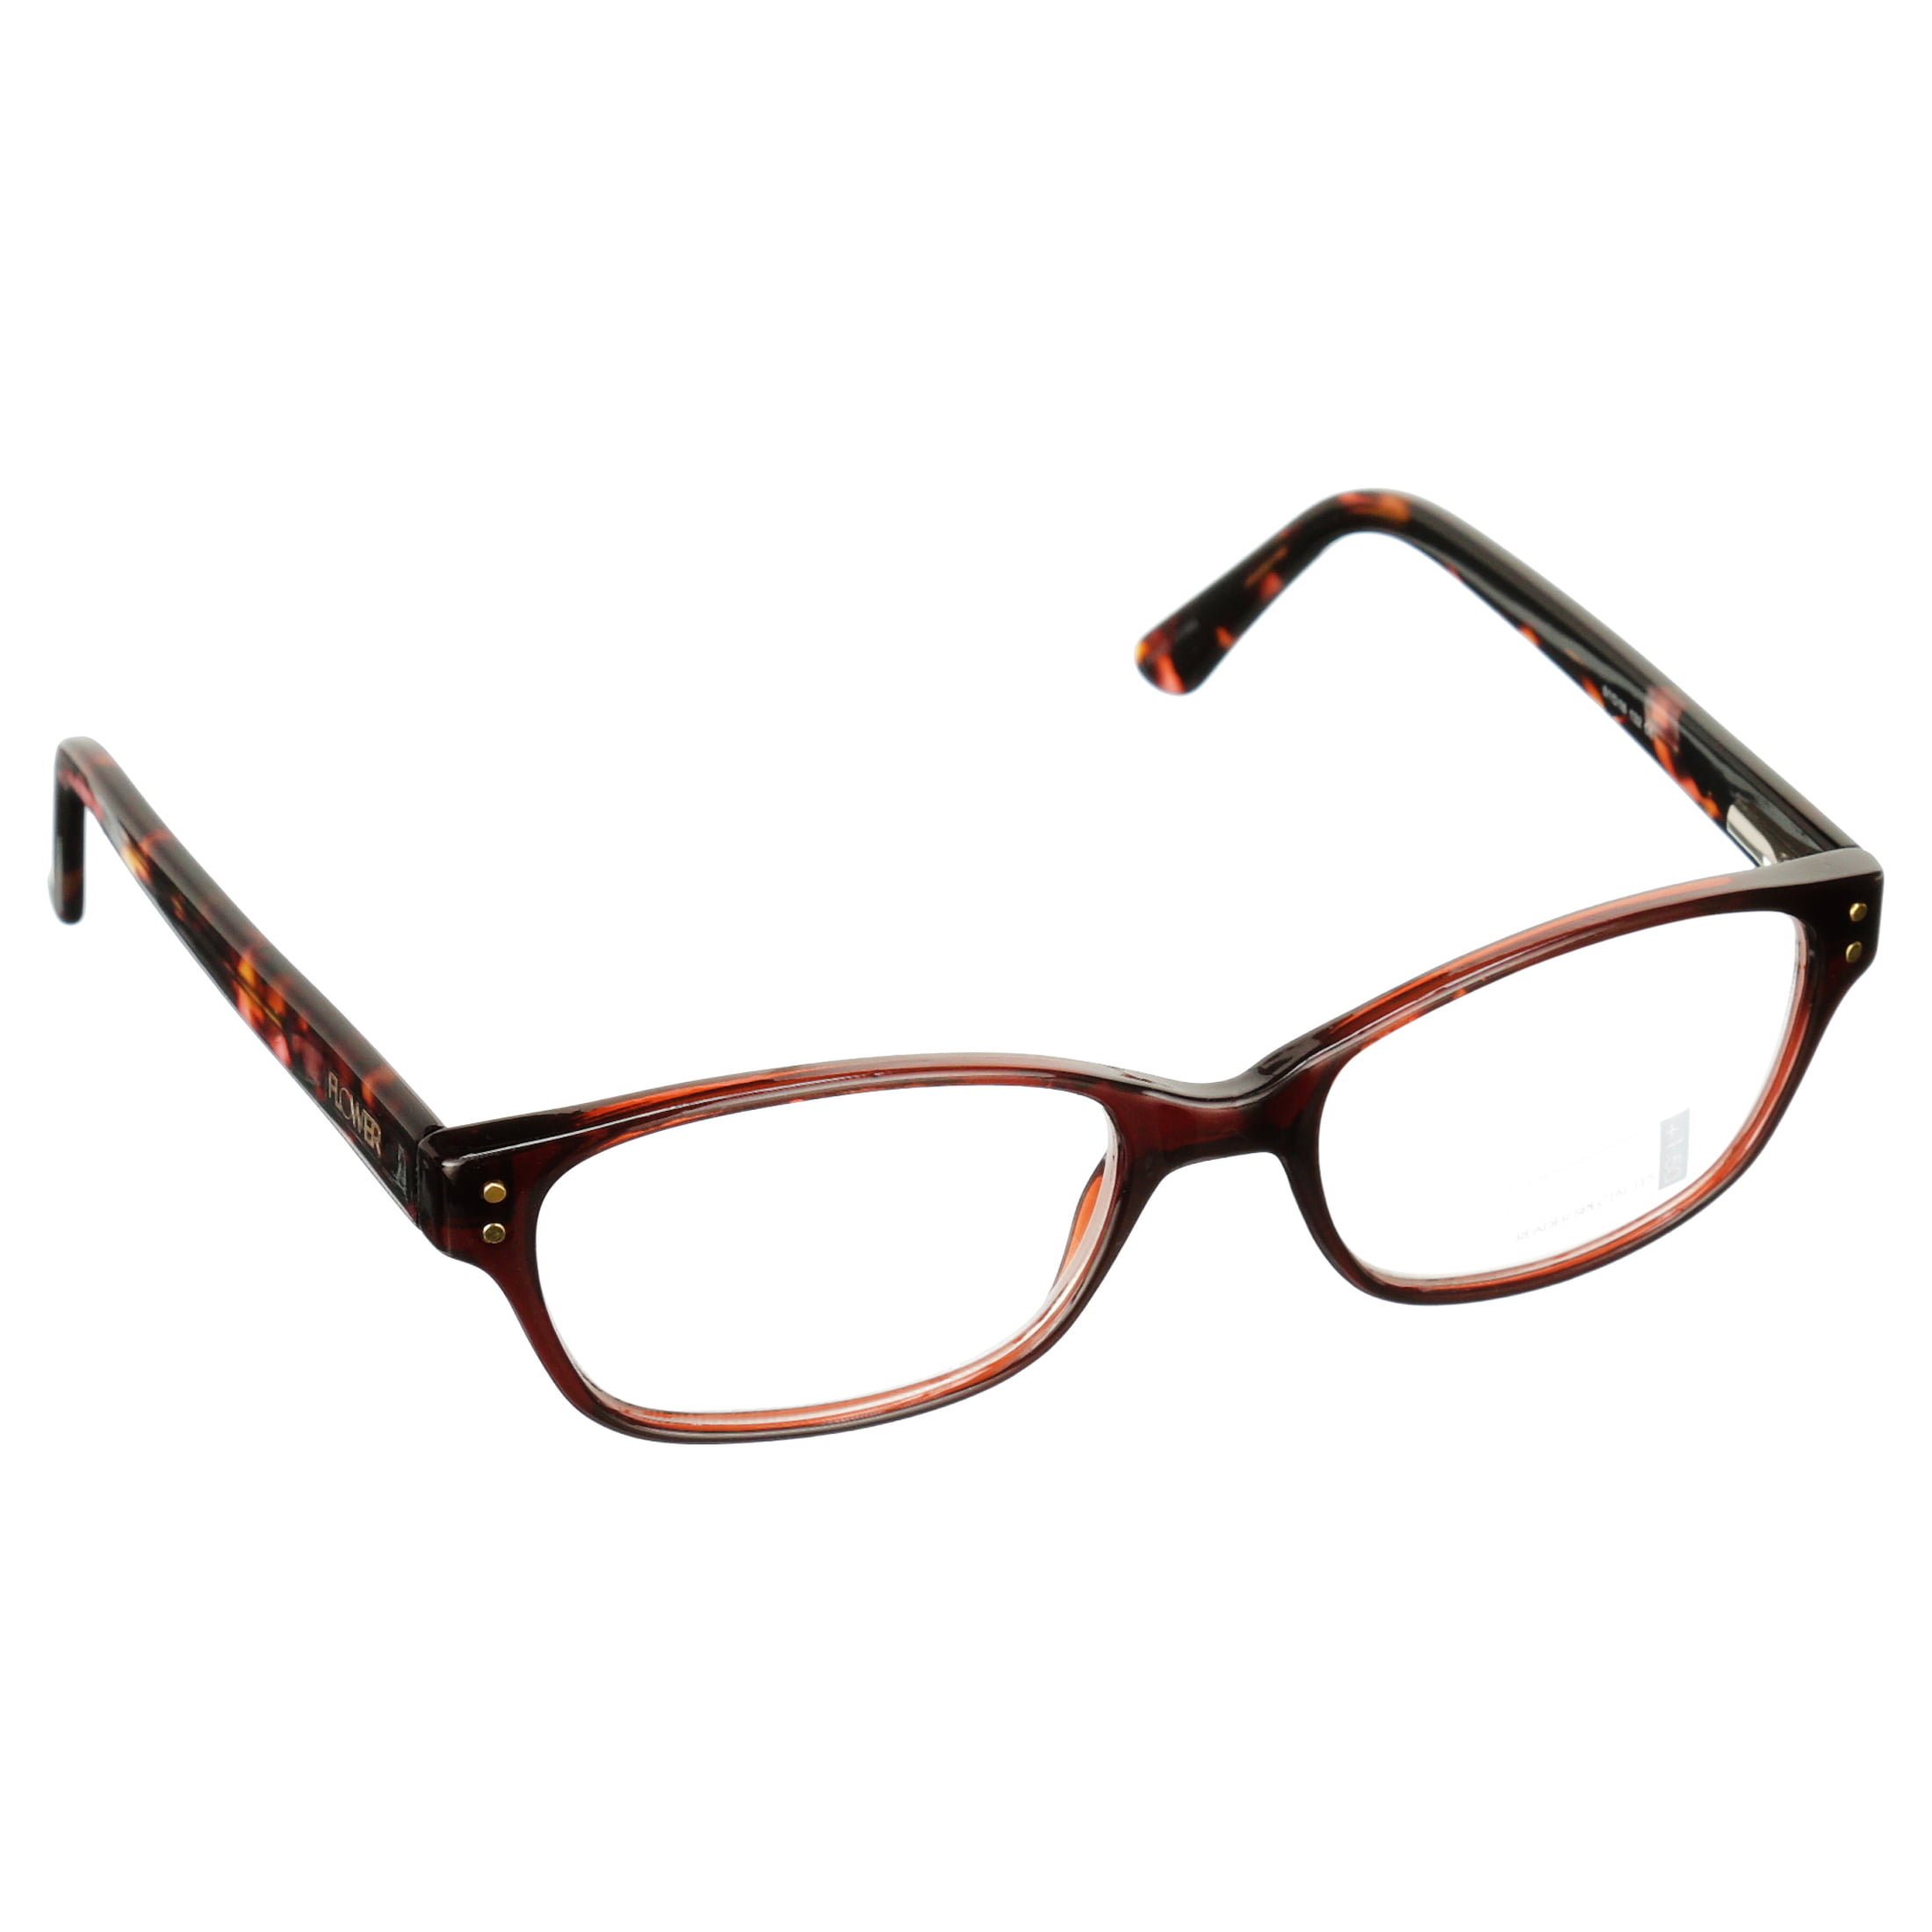 Select-A-Vision Womens Bamboo 2550 Demi Reading Glasses, Demi, 35 mm US